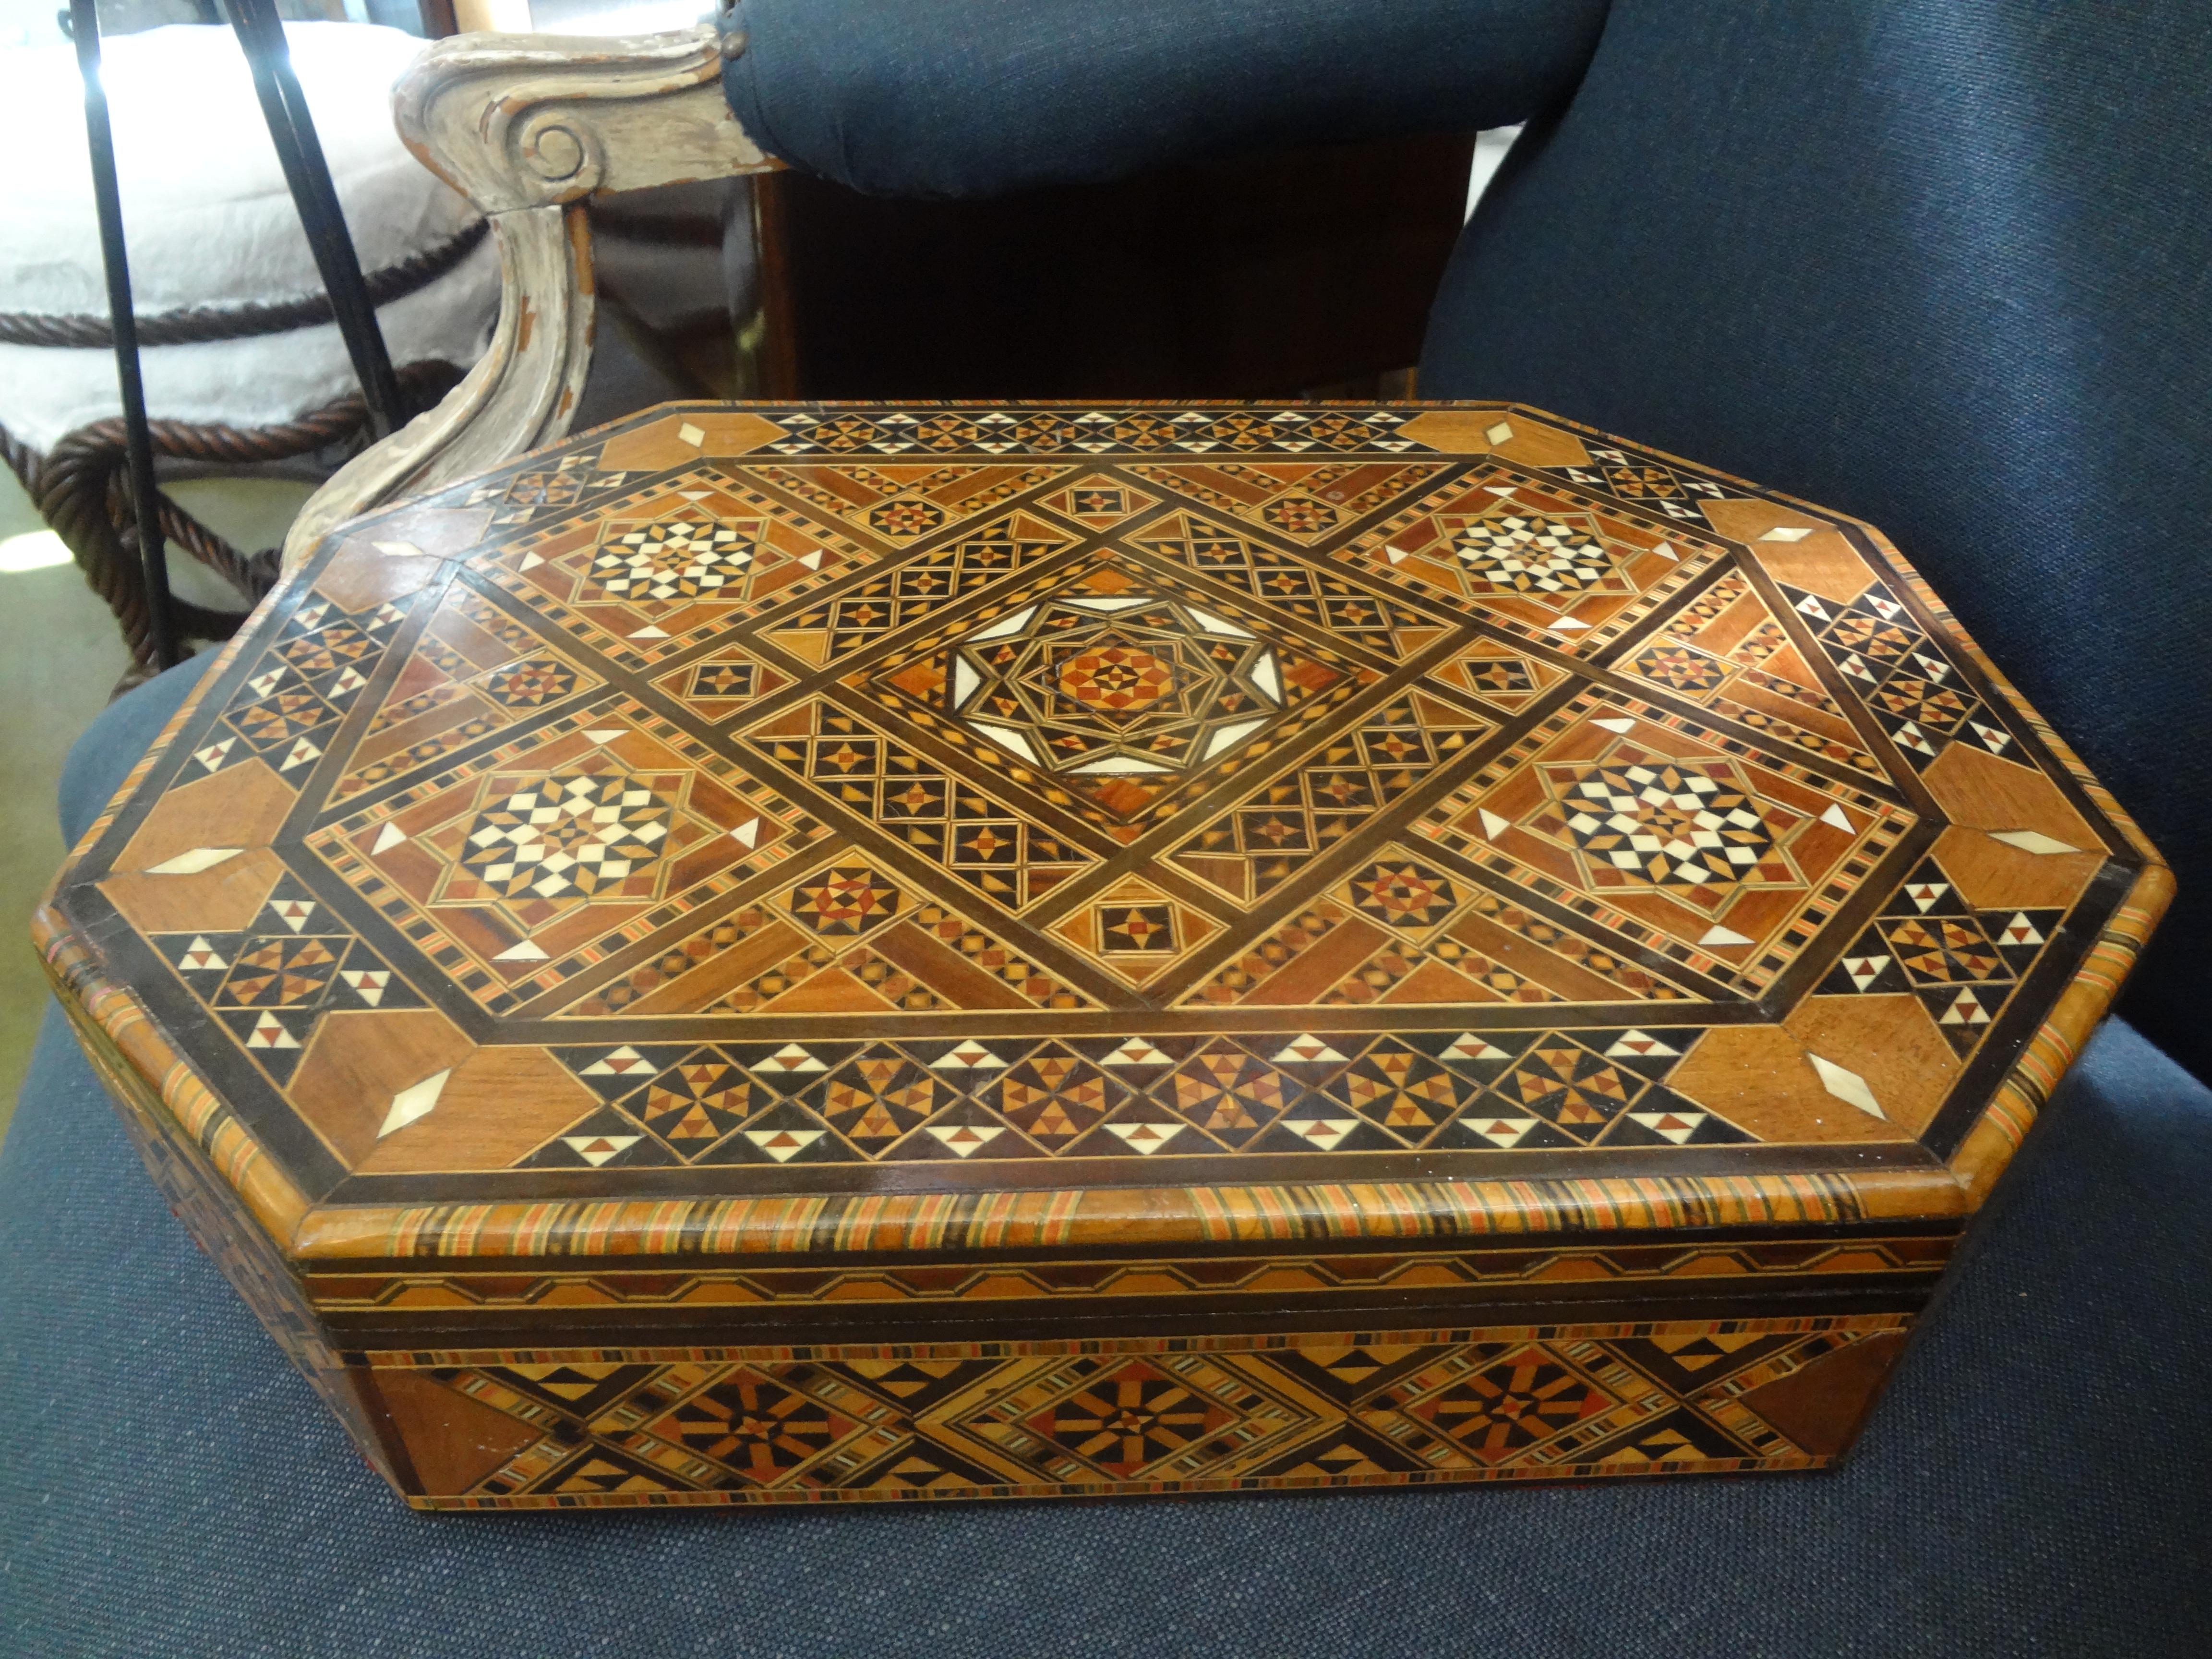 Large Moroccan or Middle Eastern Octagonal Box with Inlaid Mother of Pearl 1